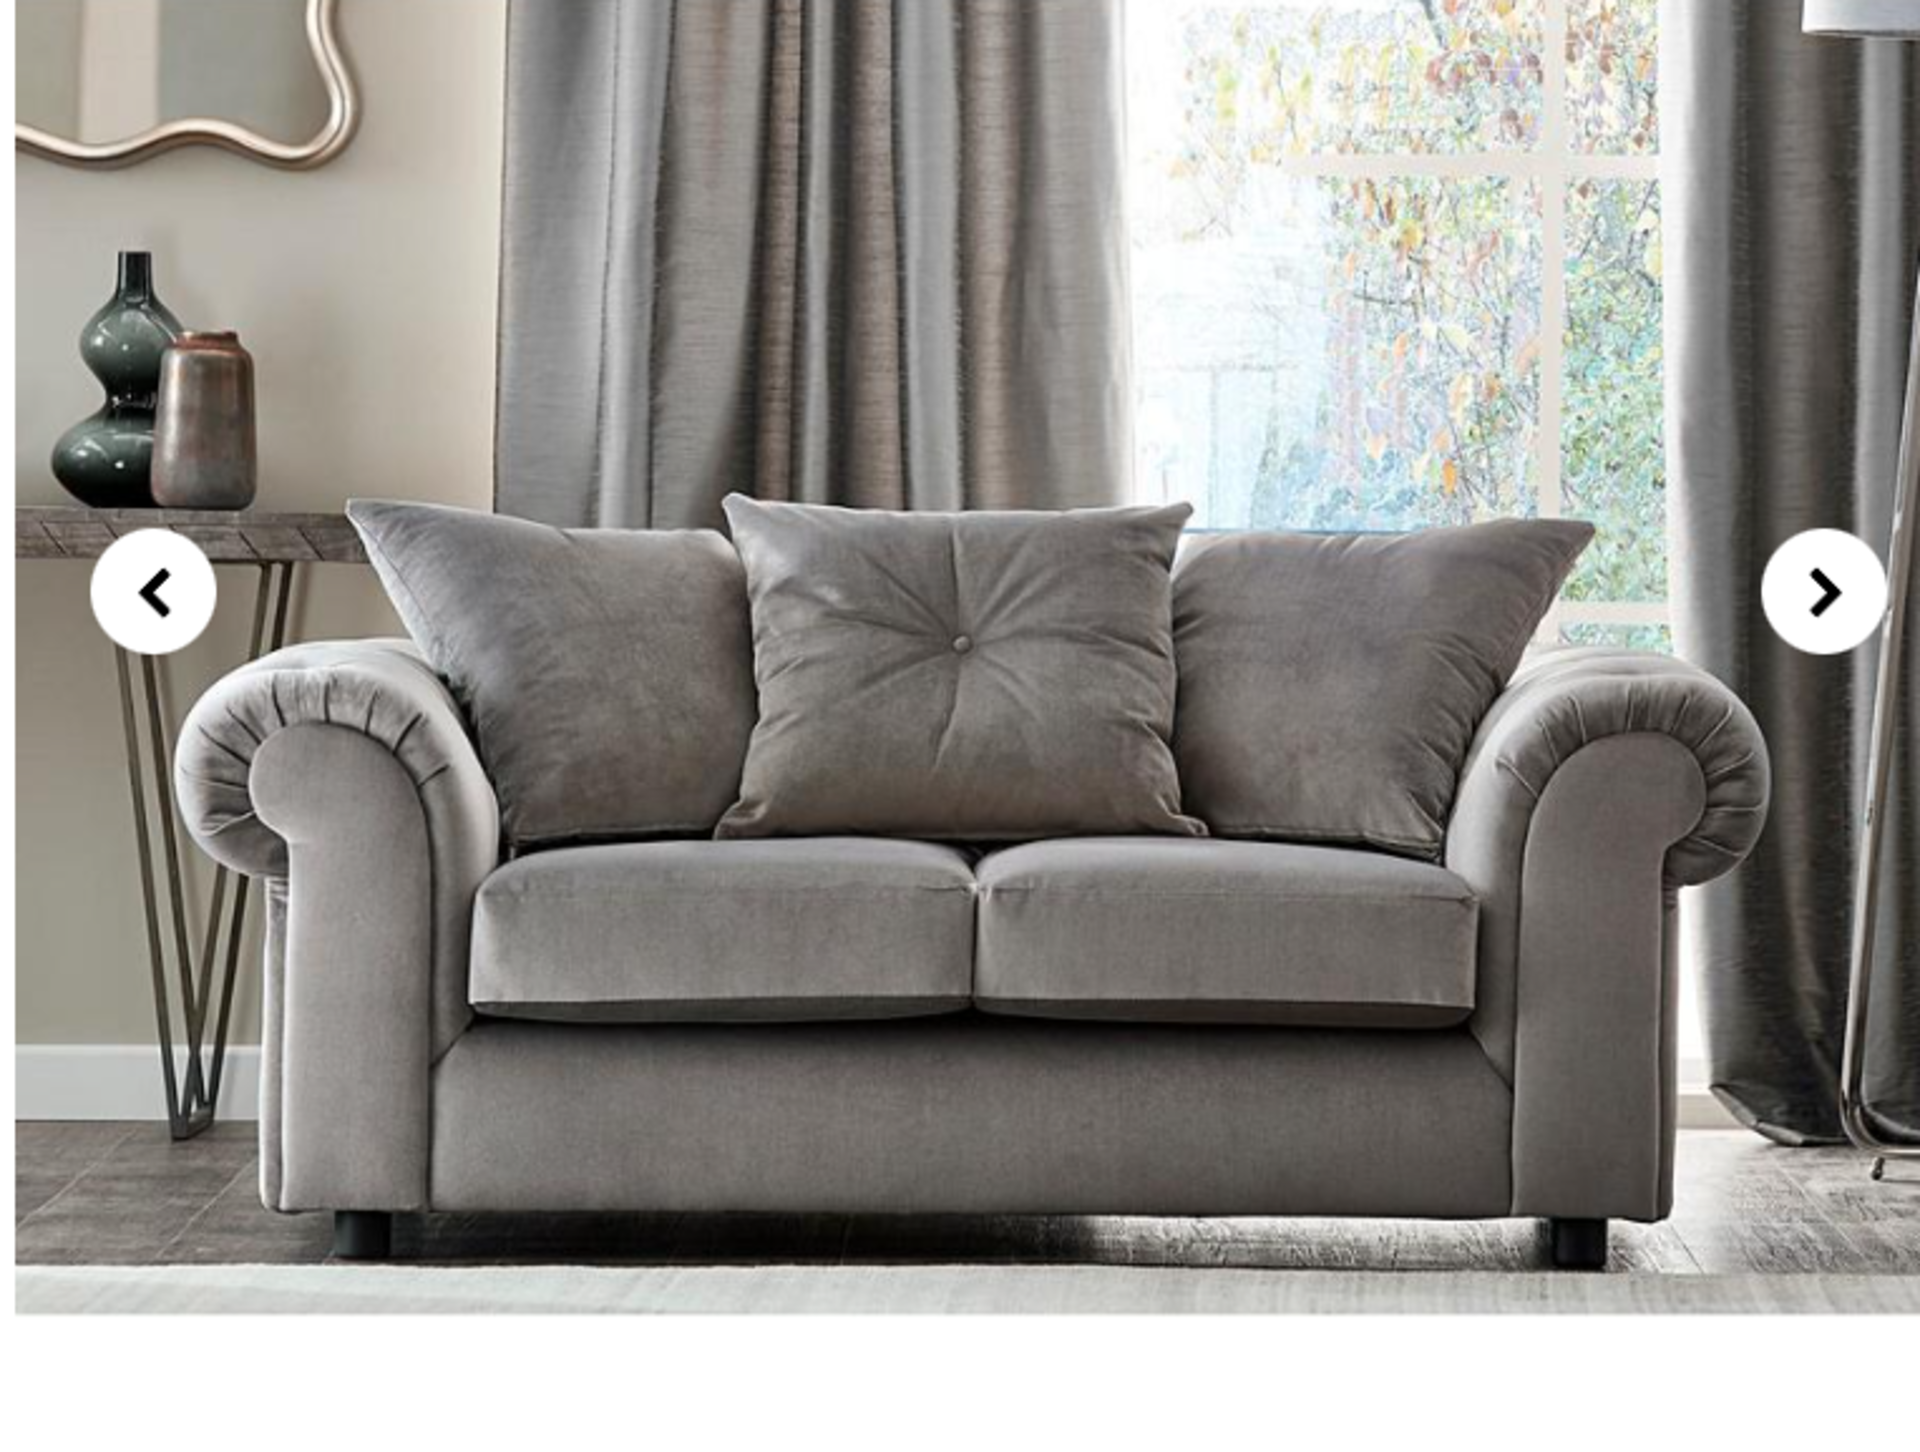 Derby 2 Seater Sofa. - SR. RRP £799.00. Discover maximum comfort and luxury with this gorgeous - Image 2 of 3